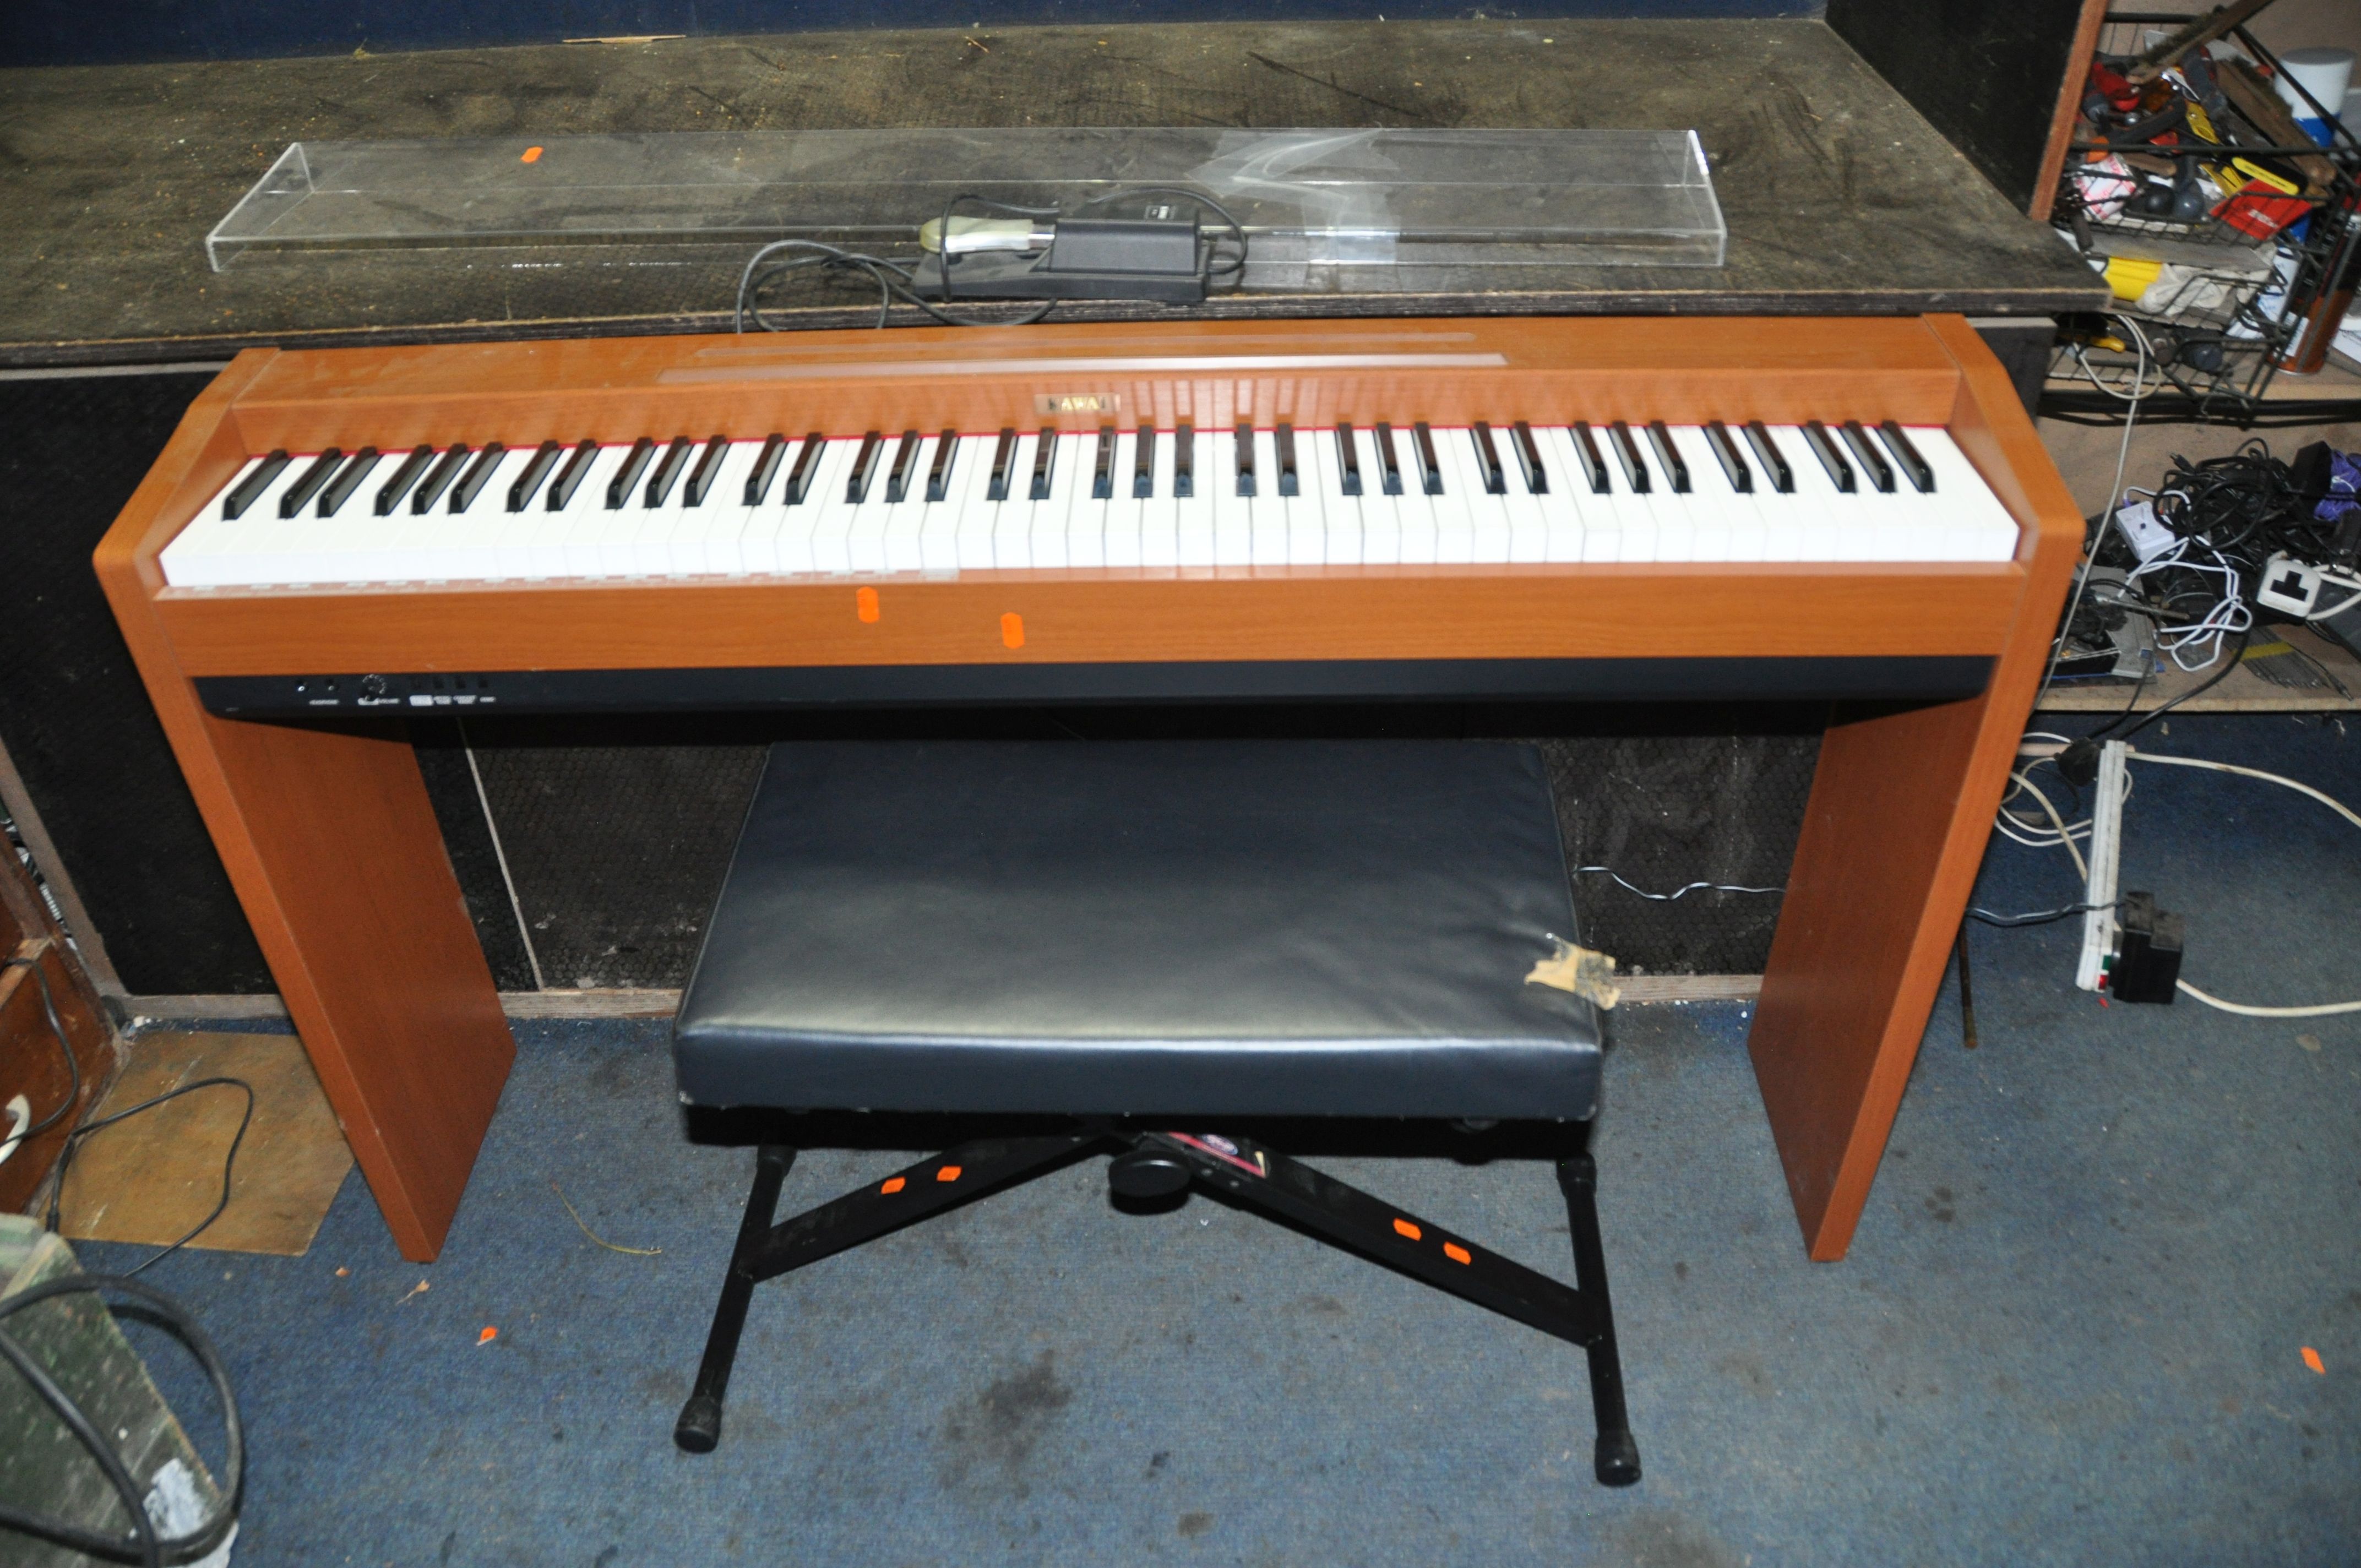 A KAWAI CL20C ELECTRONIC PIANO with F1r sustain pedal and a Stagg stool (PAT pass and working with